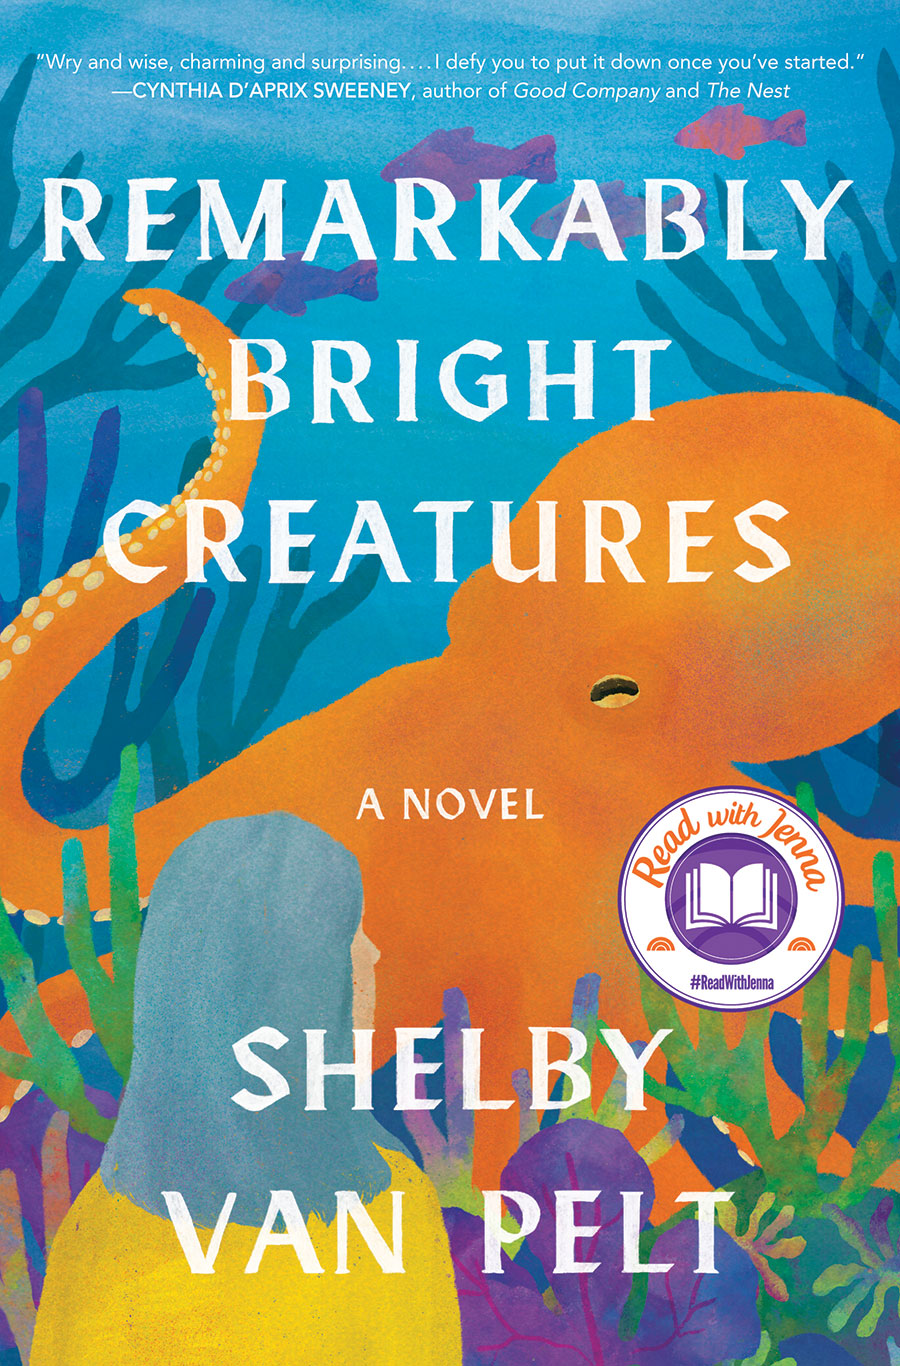 Image of the featured book cover featuring a bright orange octopus 